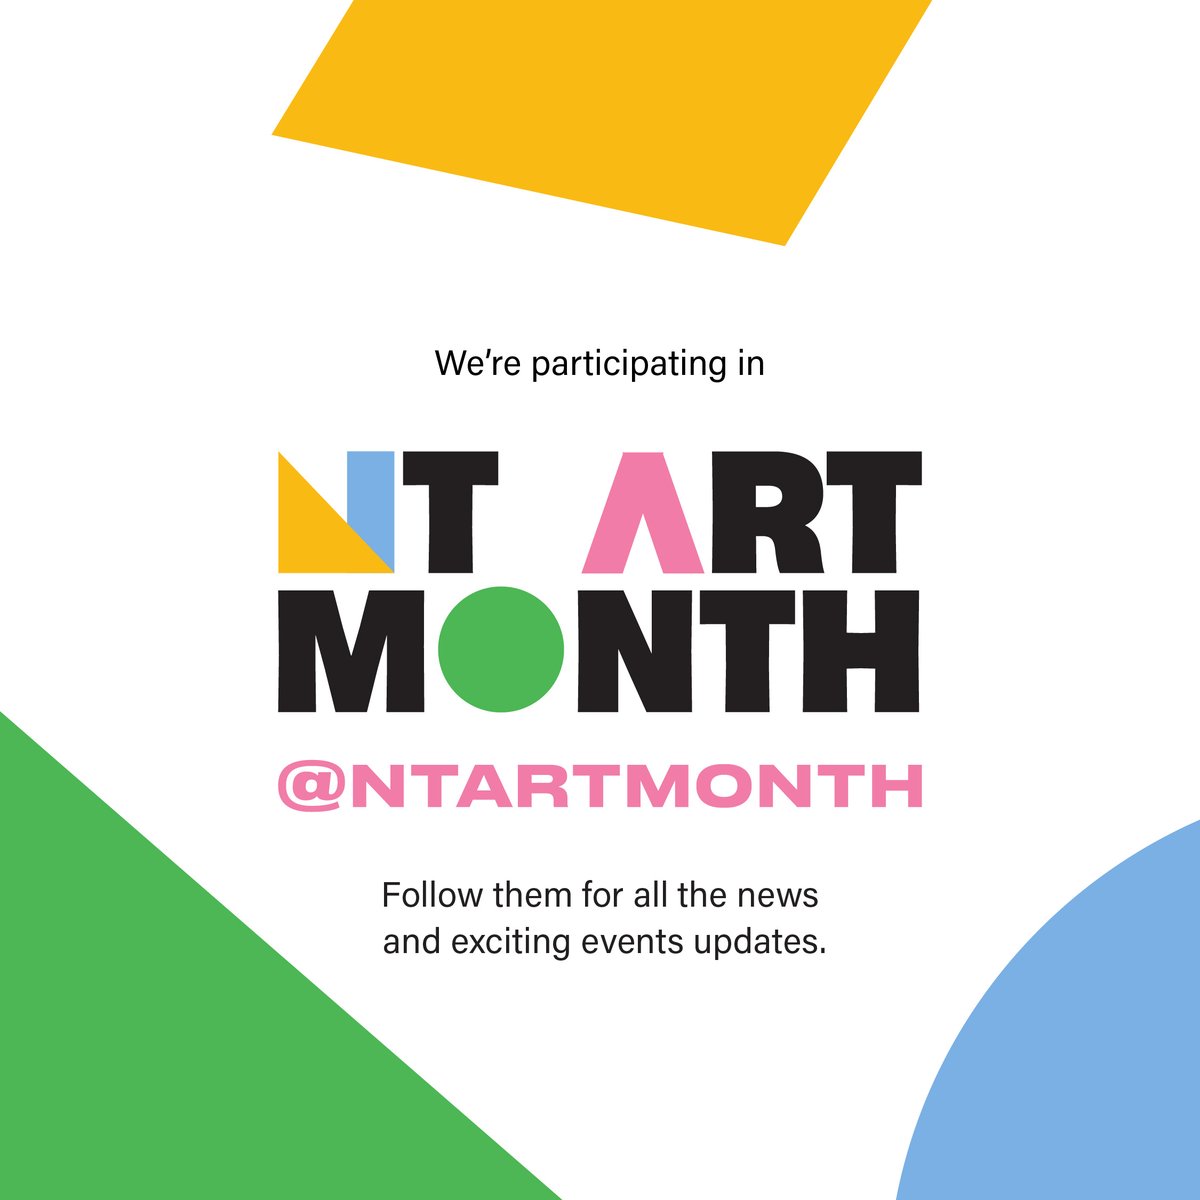 This new event will run from the 7th - 30th June. Follow @NTArtMonth for updates, and look out for news about the artists who will be displaying their work at Watson for the month!

#ntartmonth #edinburghart #edinburghnewtown #artinedinburgh #artgalleryedinburgh